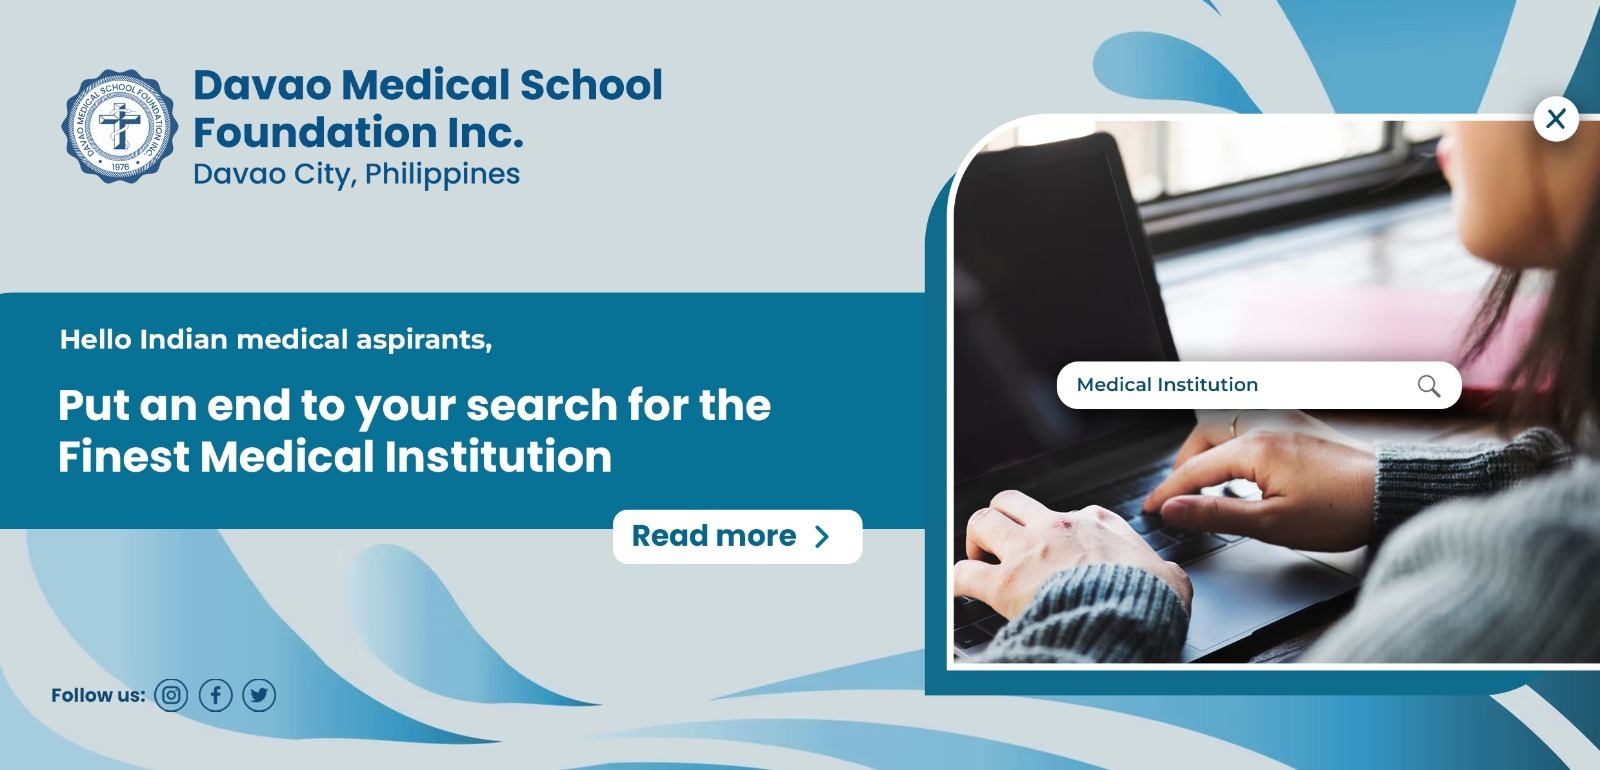 Put an end to your search for the finest medical institution – Enroll in Davao Medical School Foundation